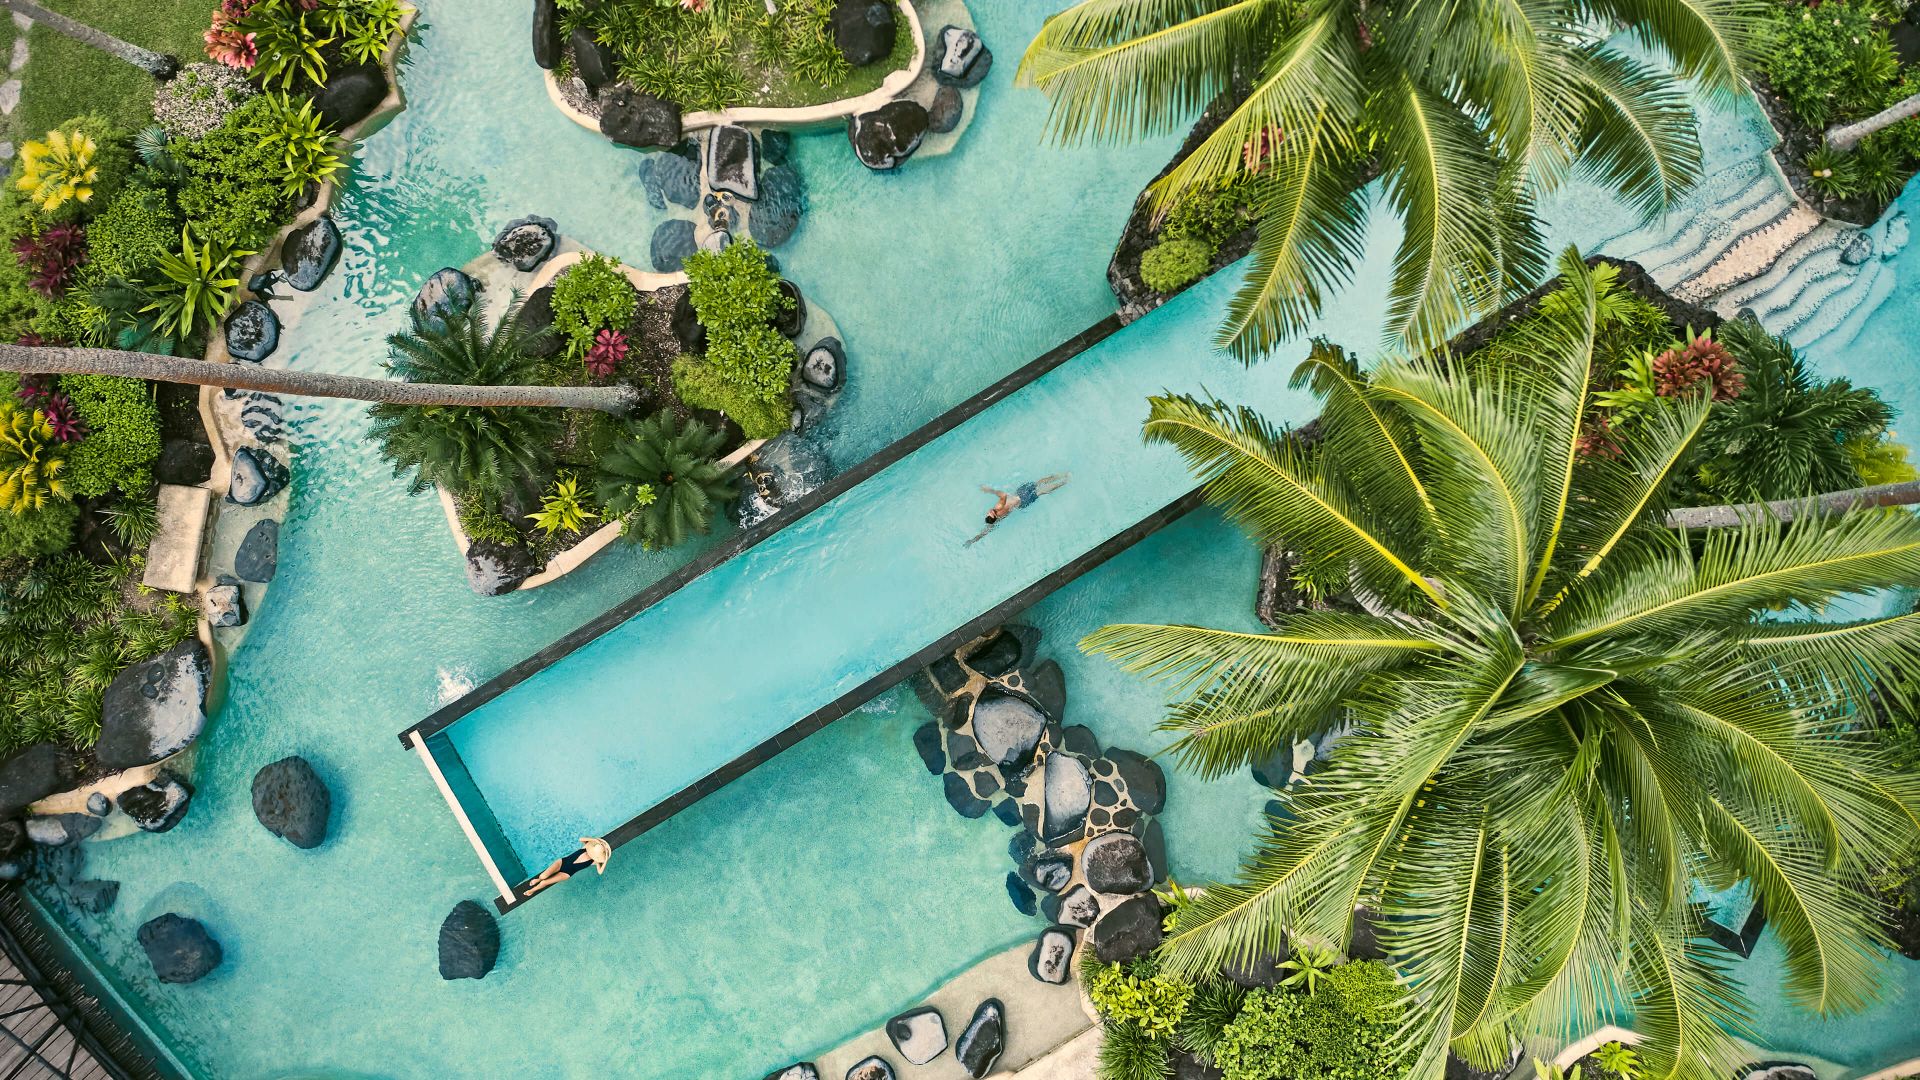 A Pool With A Slide And Trees